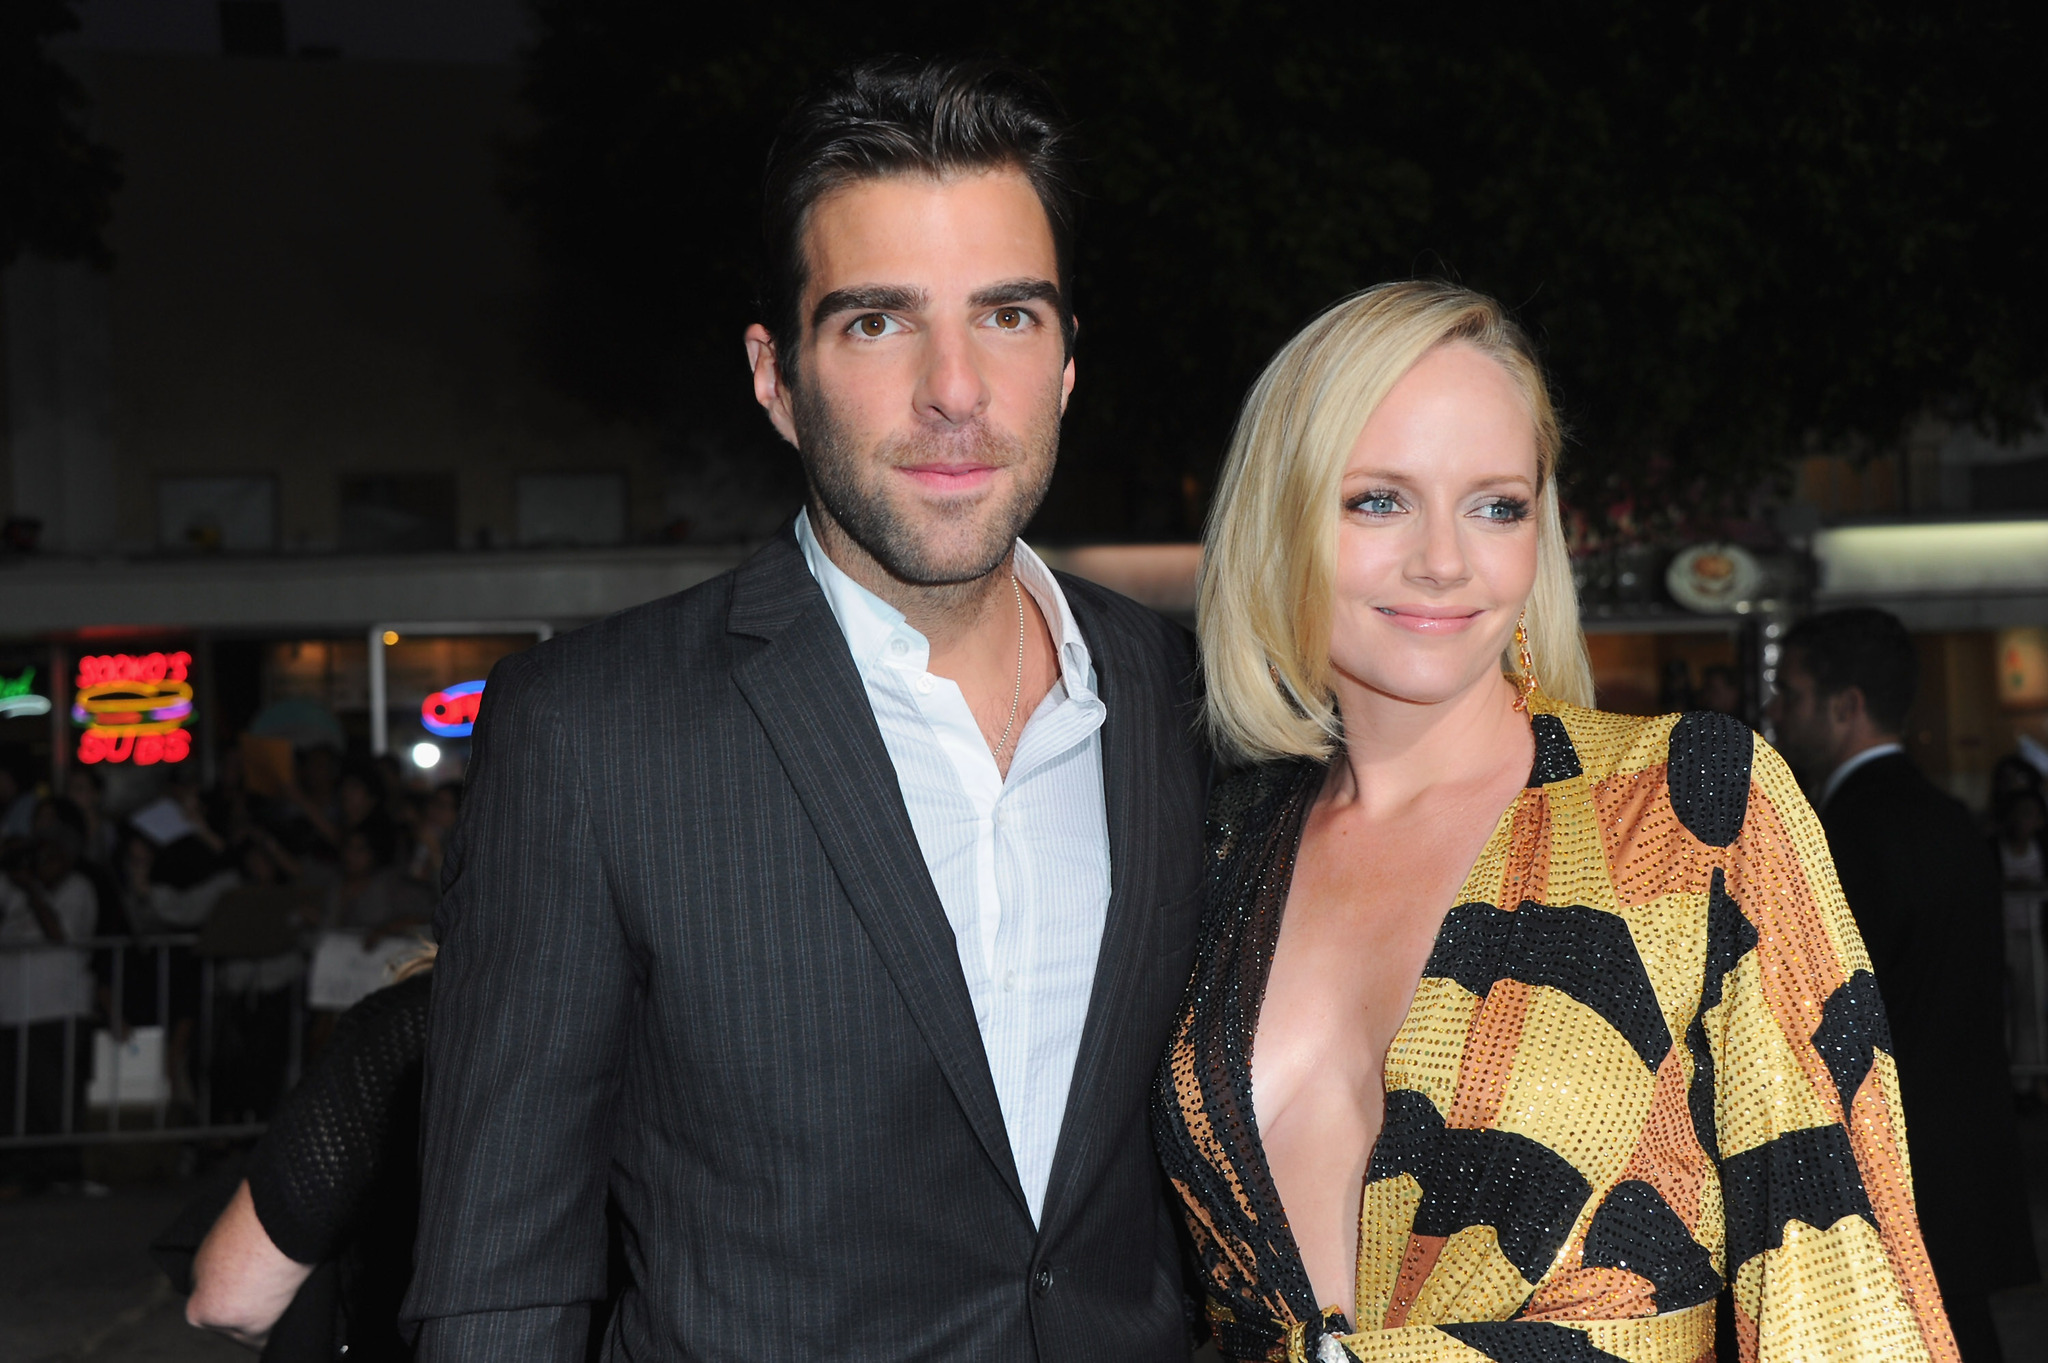 Marley Shelton and Zachary Quinto at event of Blondine iesko vyro (2011)